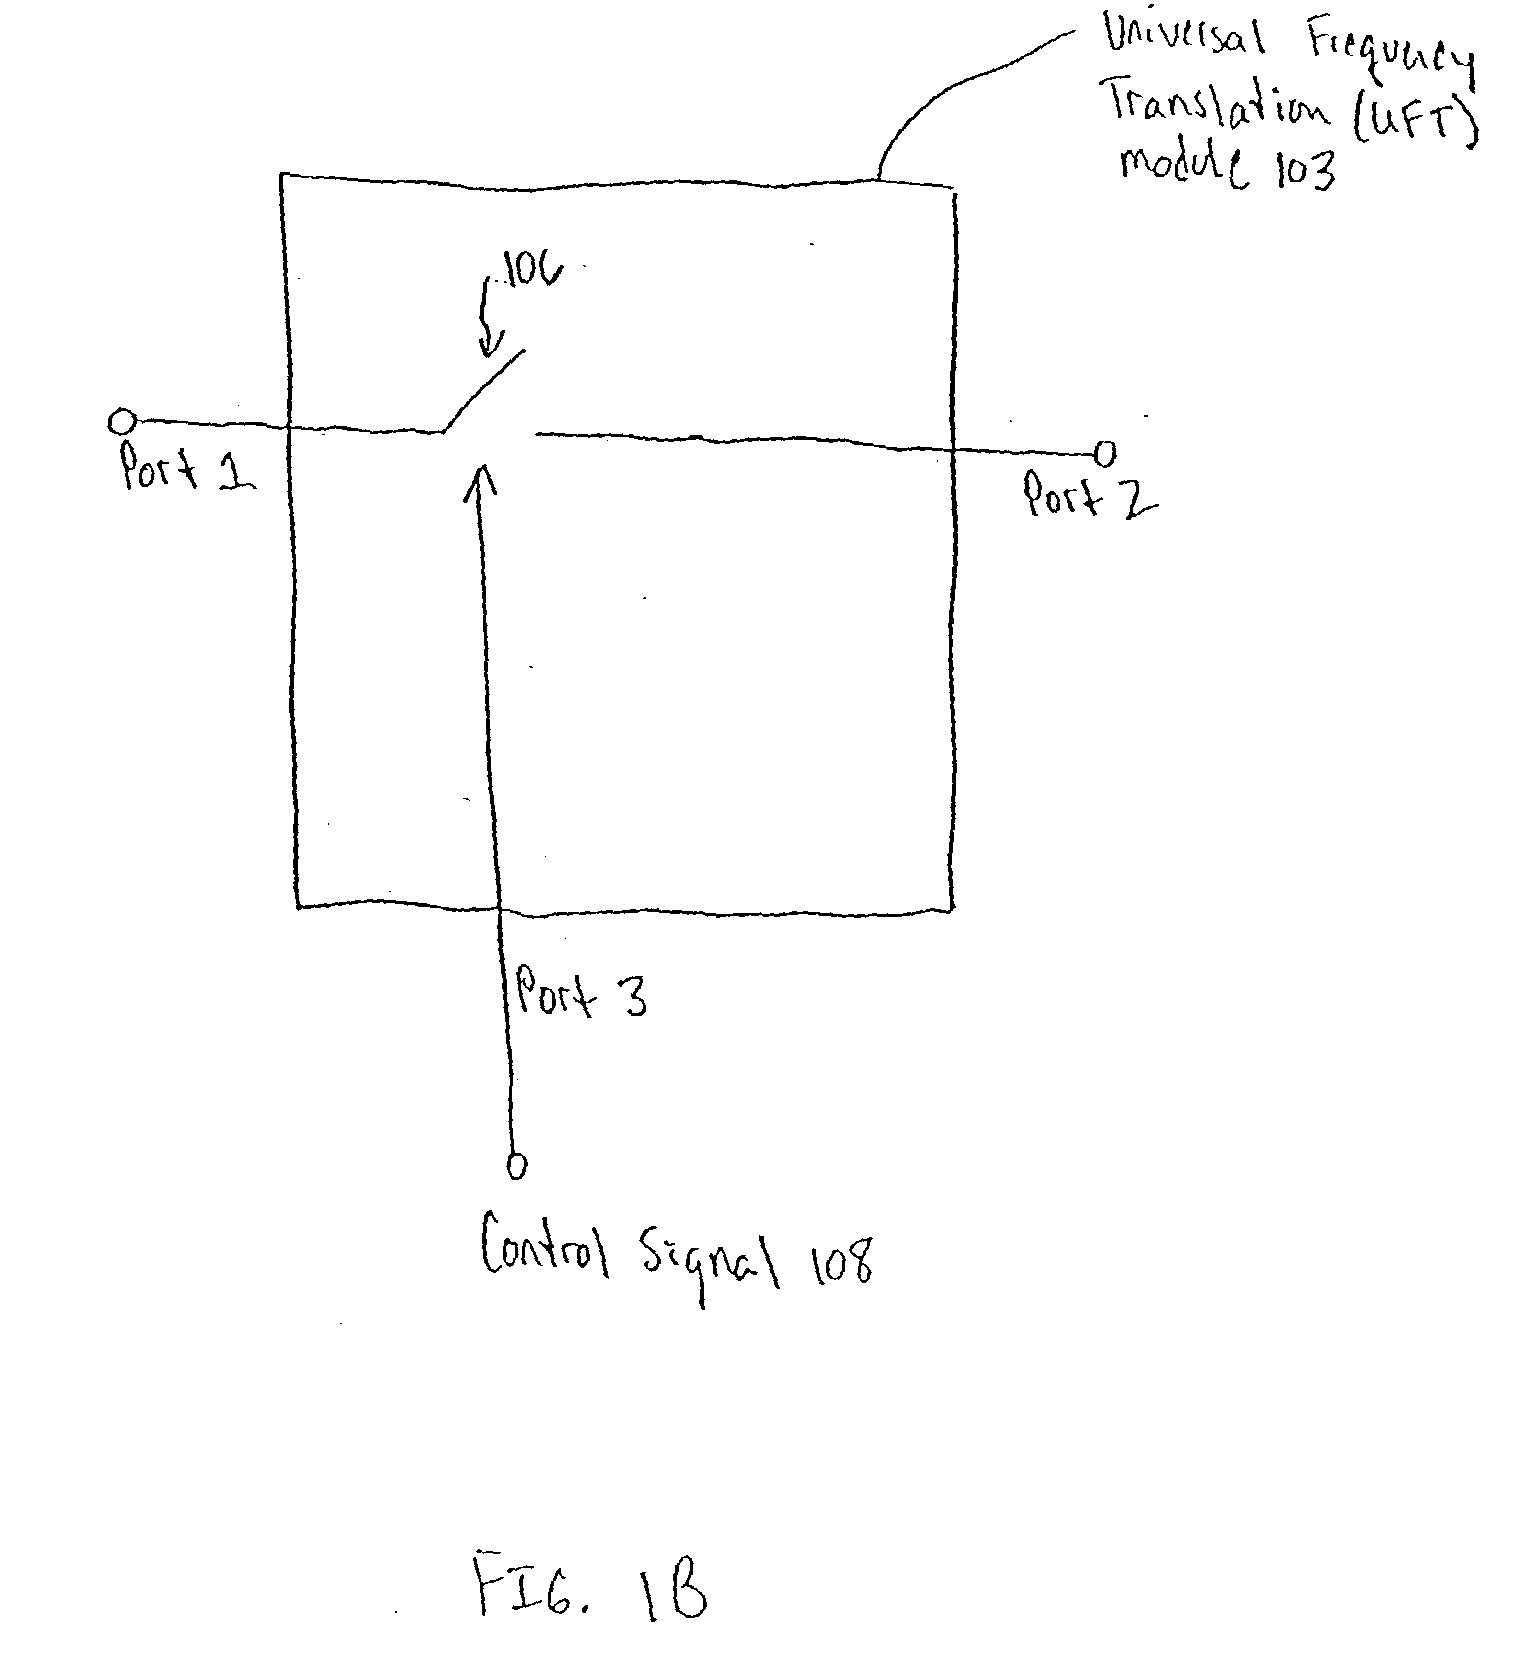 Method and apparatus for reducing re-radiation using techniques of universal frequency translation technology